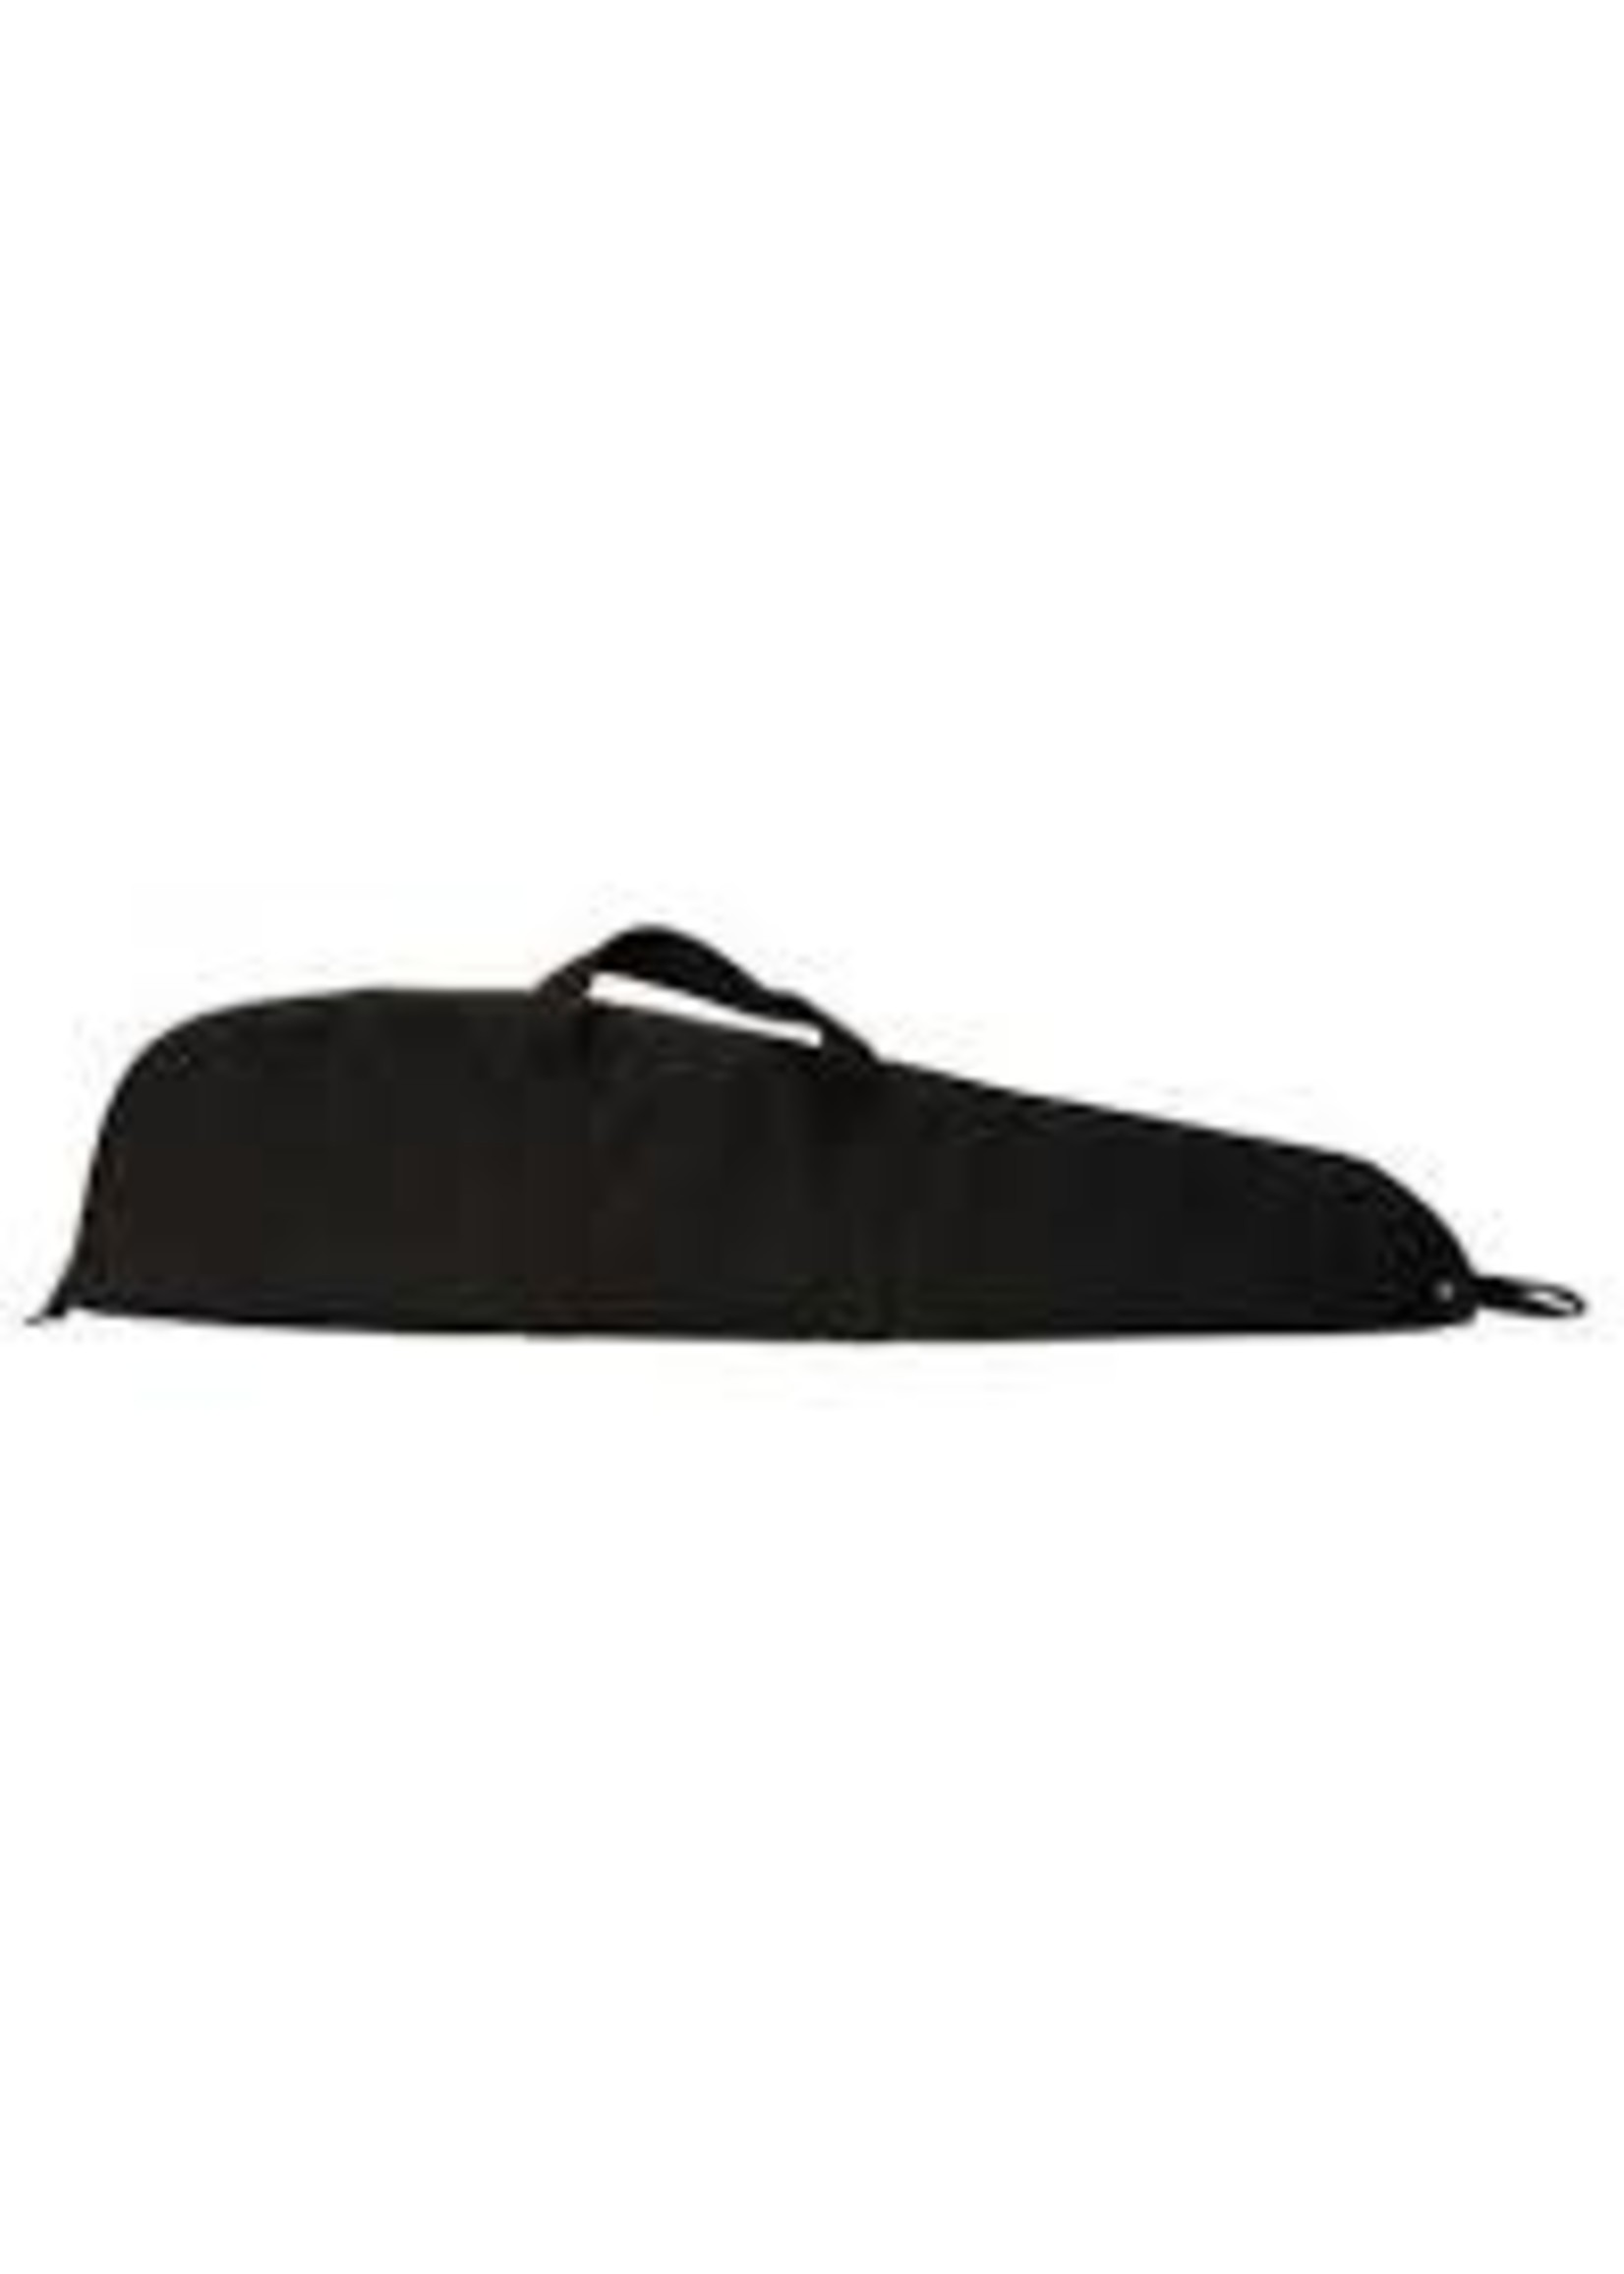 BELL OUTDOOR PRODUCTS BELL SOFT GUN CASE 33-34" BLACK